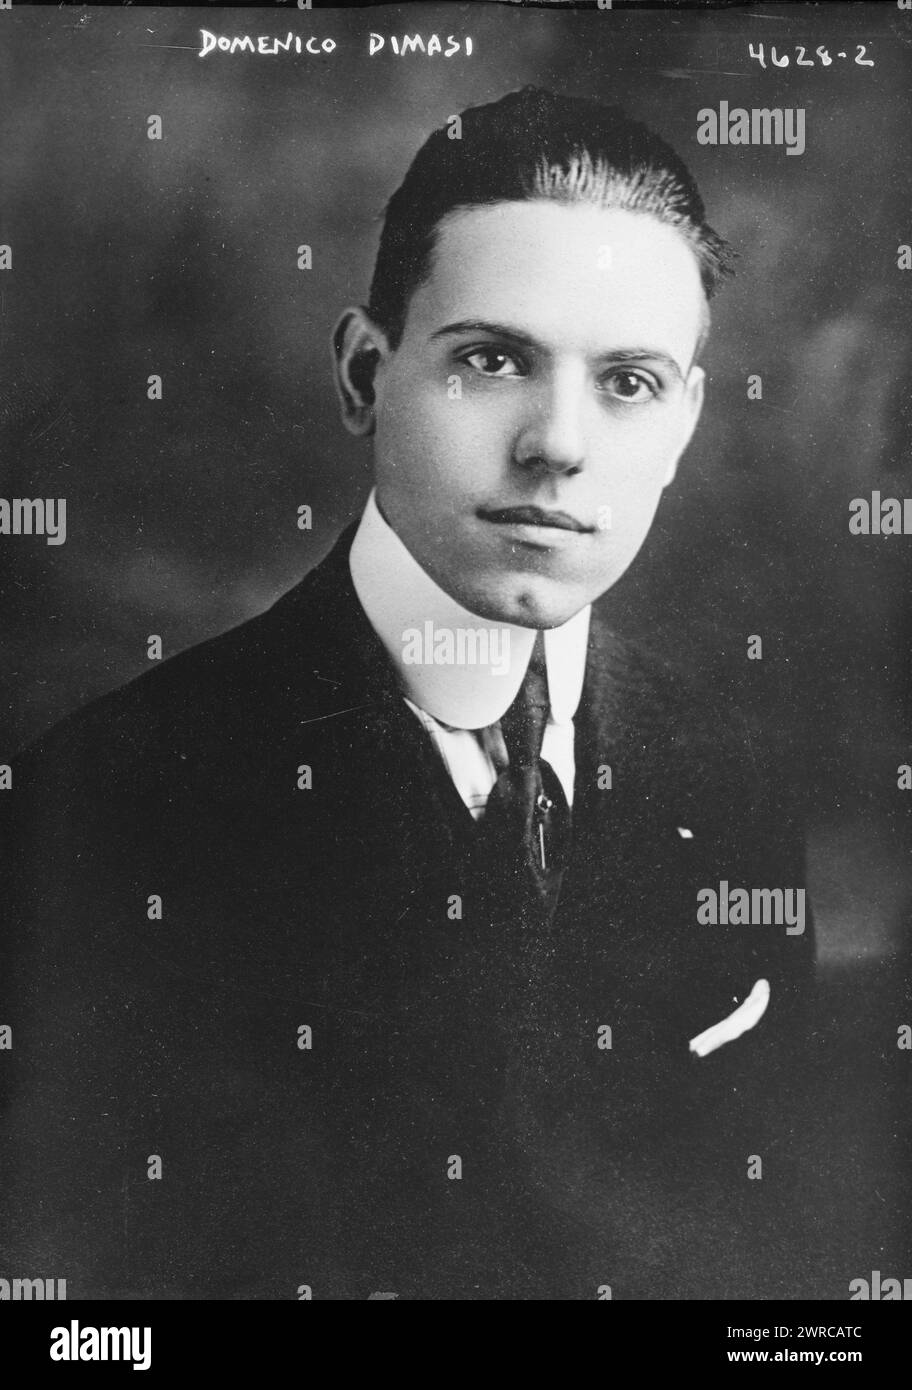 Domenico Dimasi, Photograph shows Private Domenico Dimasi, of Greensburg, Pennsylvania who was killed in action on May 29, 1918 during World War I., between ca. 1915 and ca. 1920, Glass negatives, 1 negative: glass Stock Photo